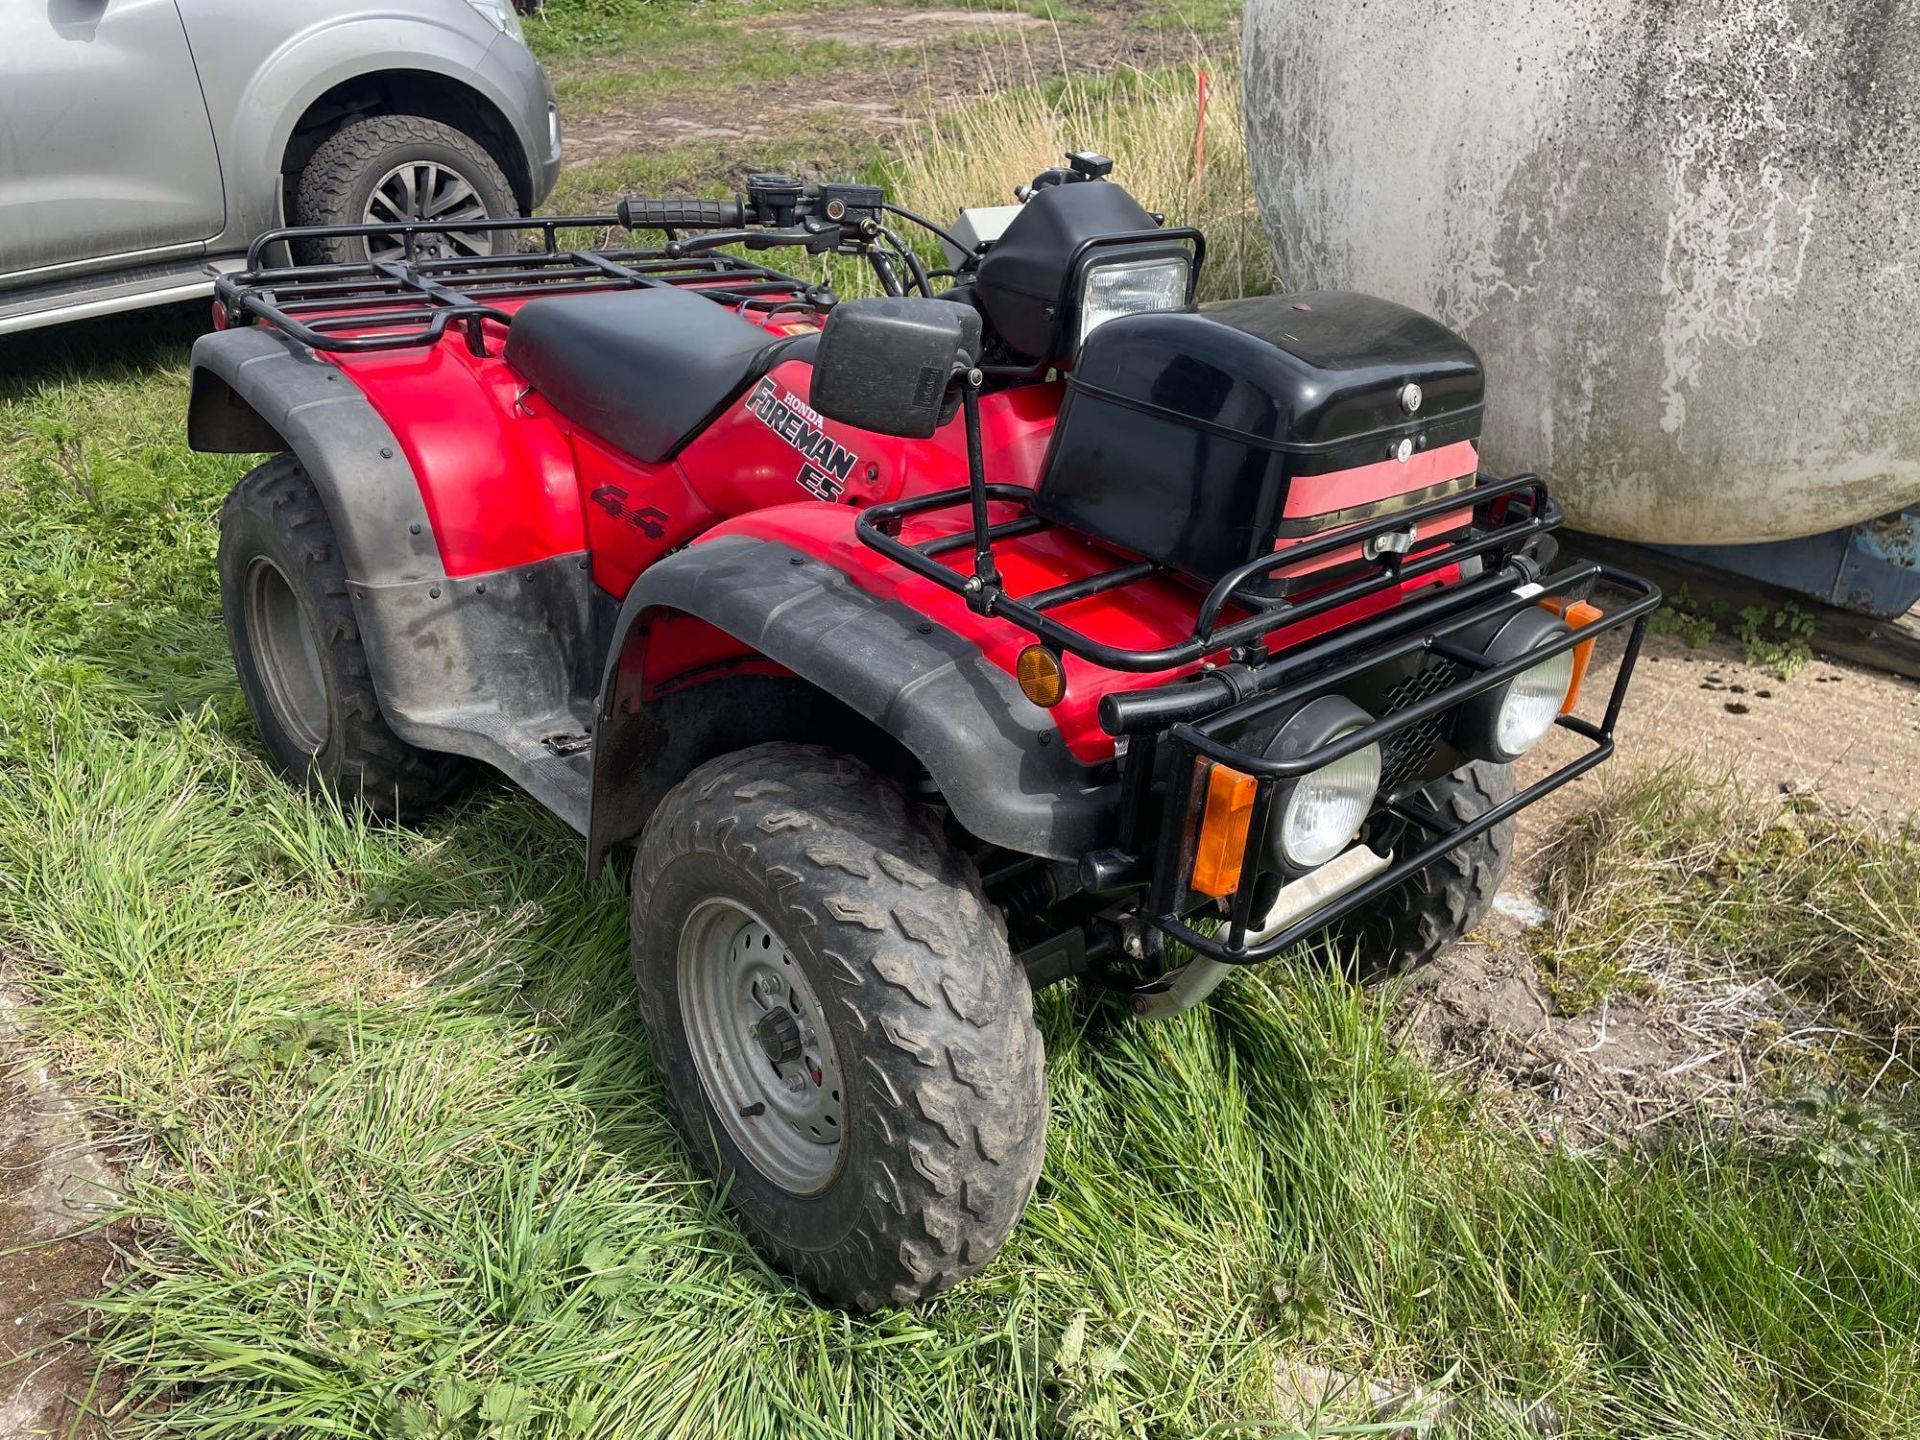 Honda Foreman ES4x4 petrol quad bike on 25x8-12 front and 25x10-12 rear wheels and tyres with front